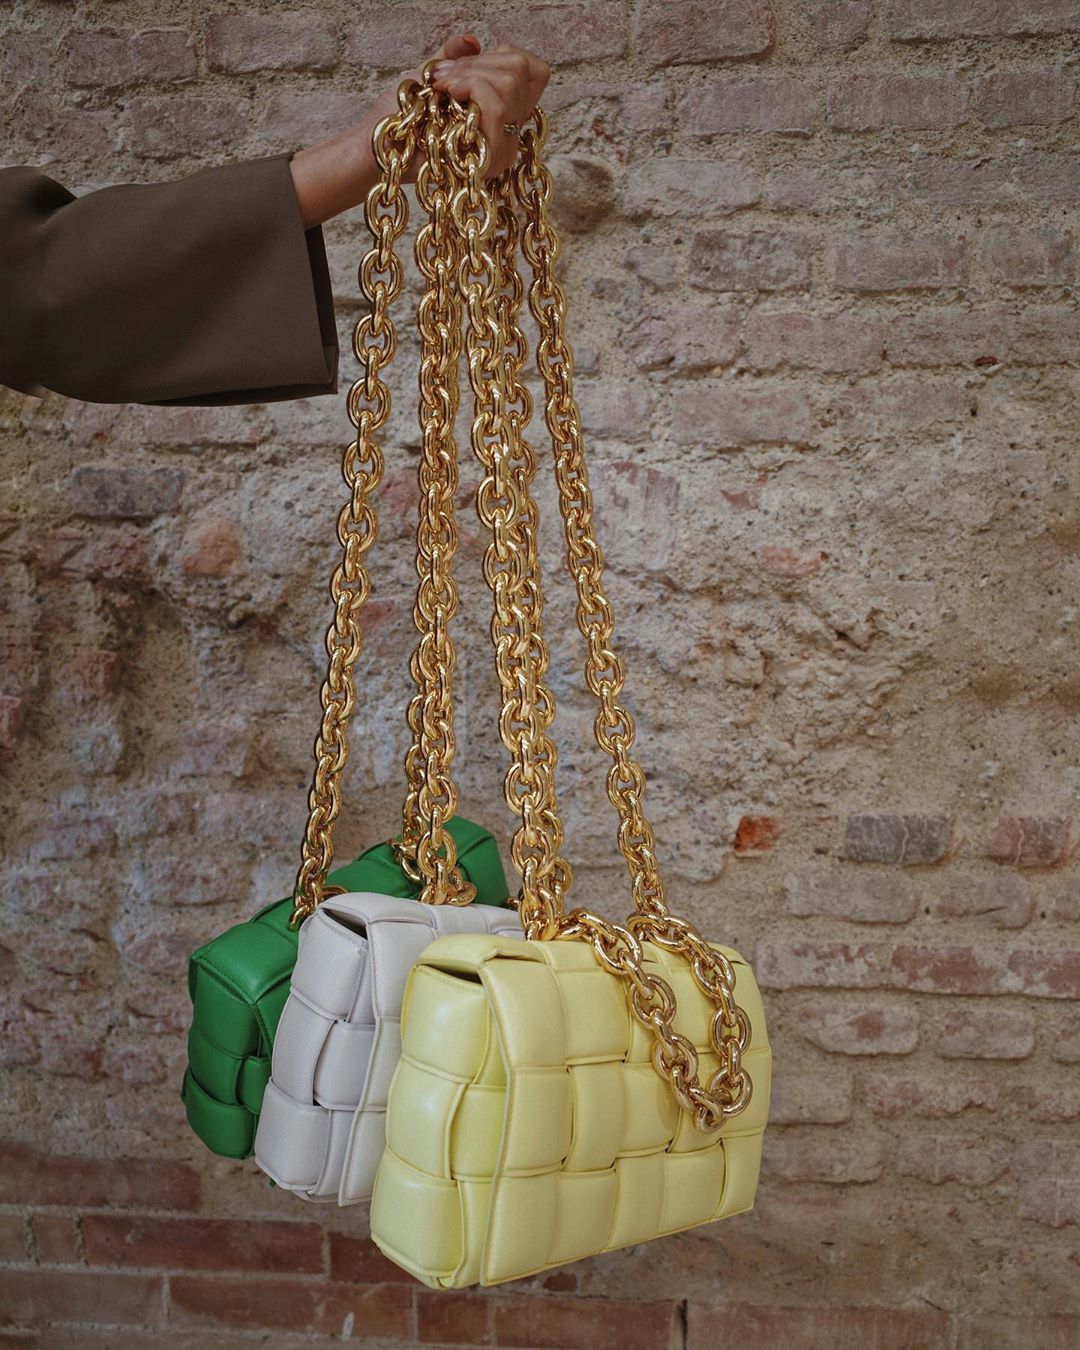 The 27 Best Chain Handbags at Every Price Point